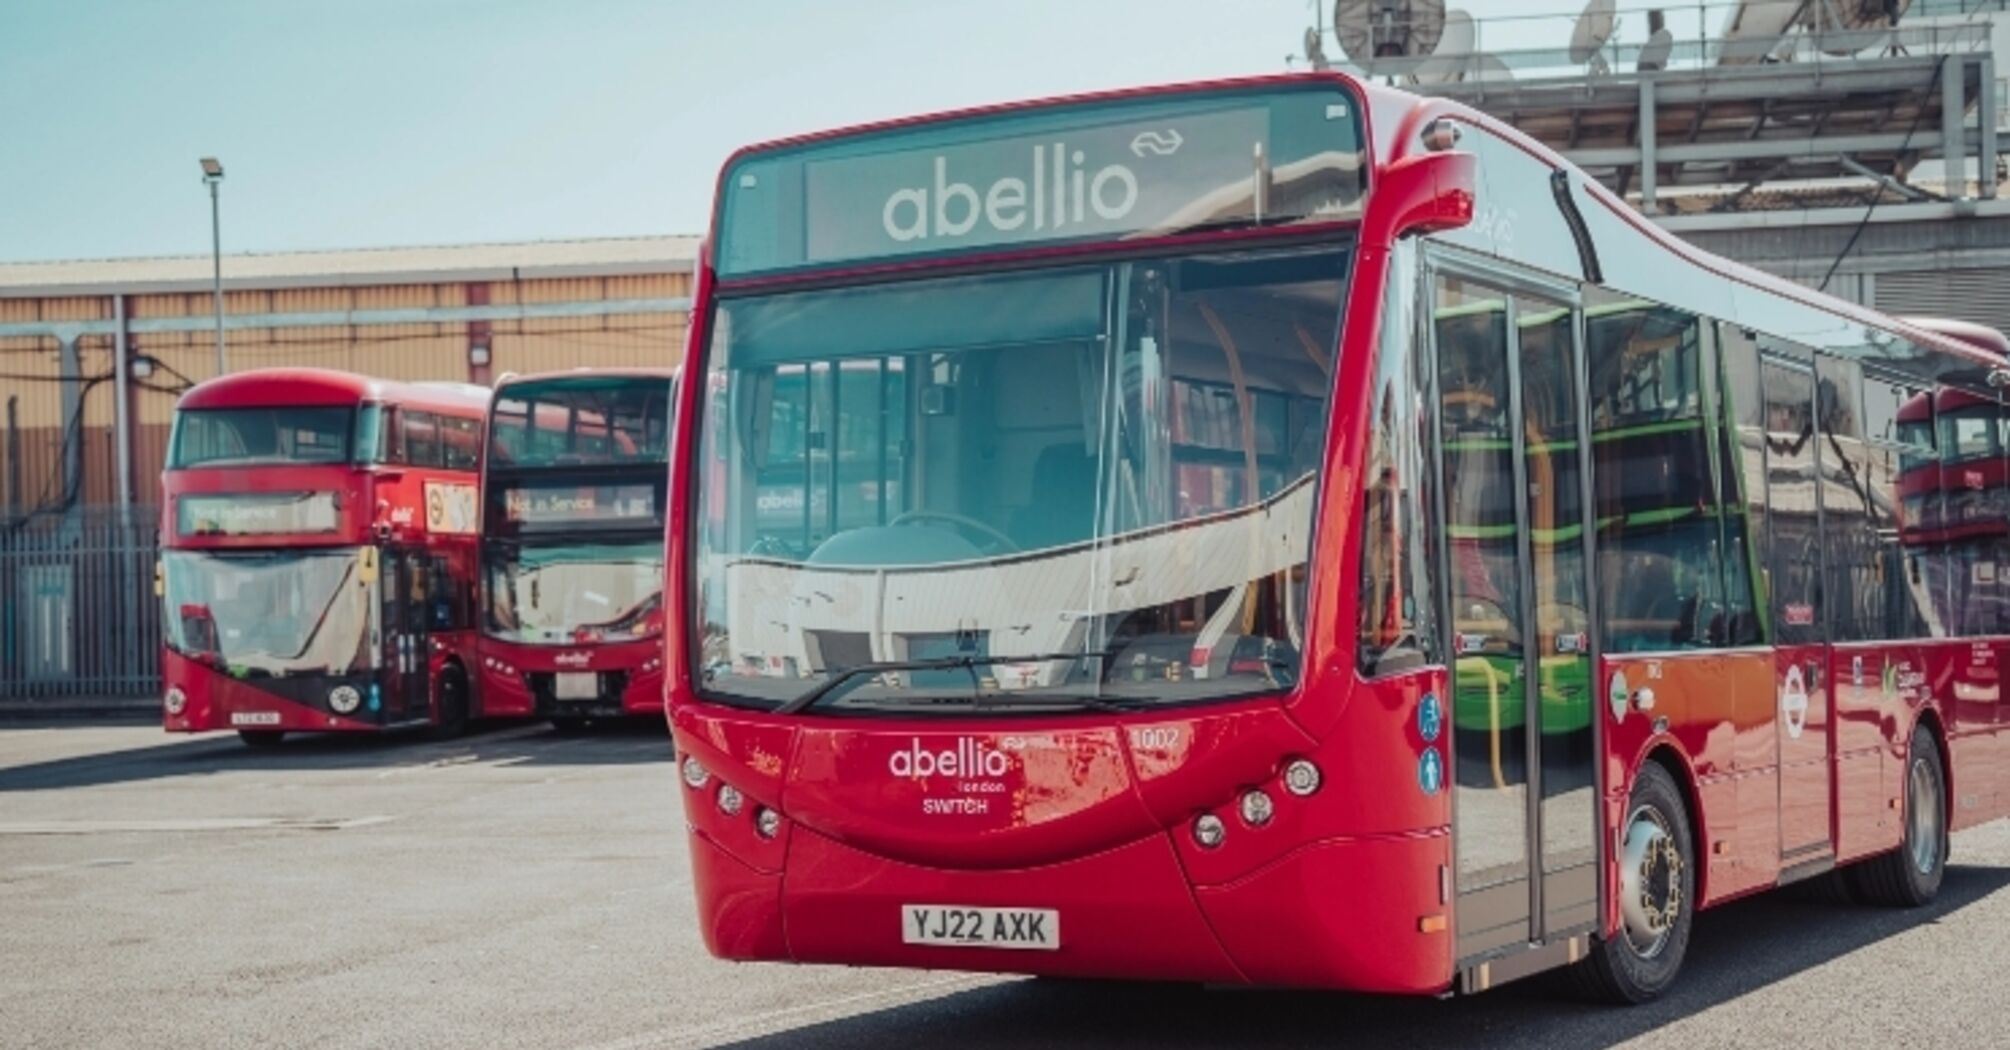 Strike of Abellio staff: the union promises "chaos" in London